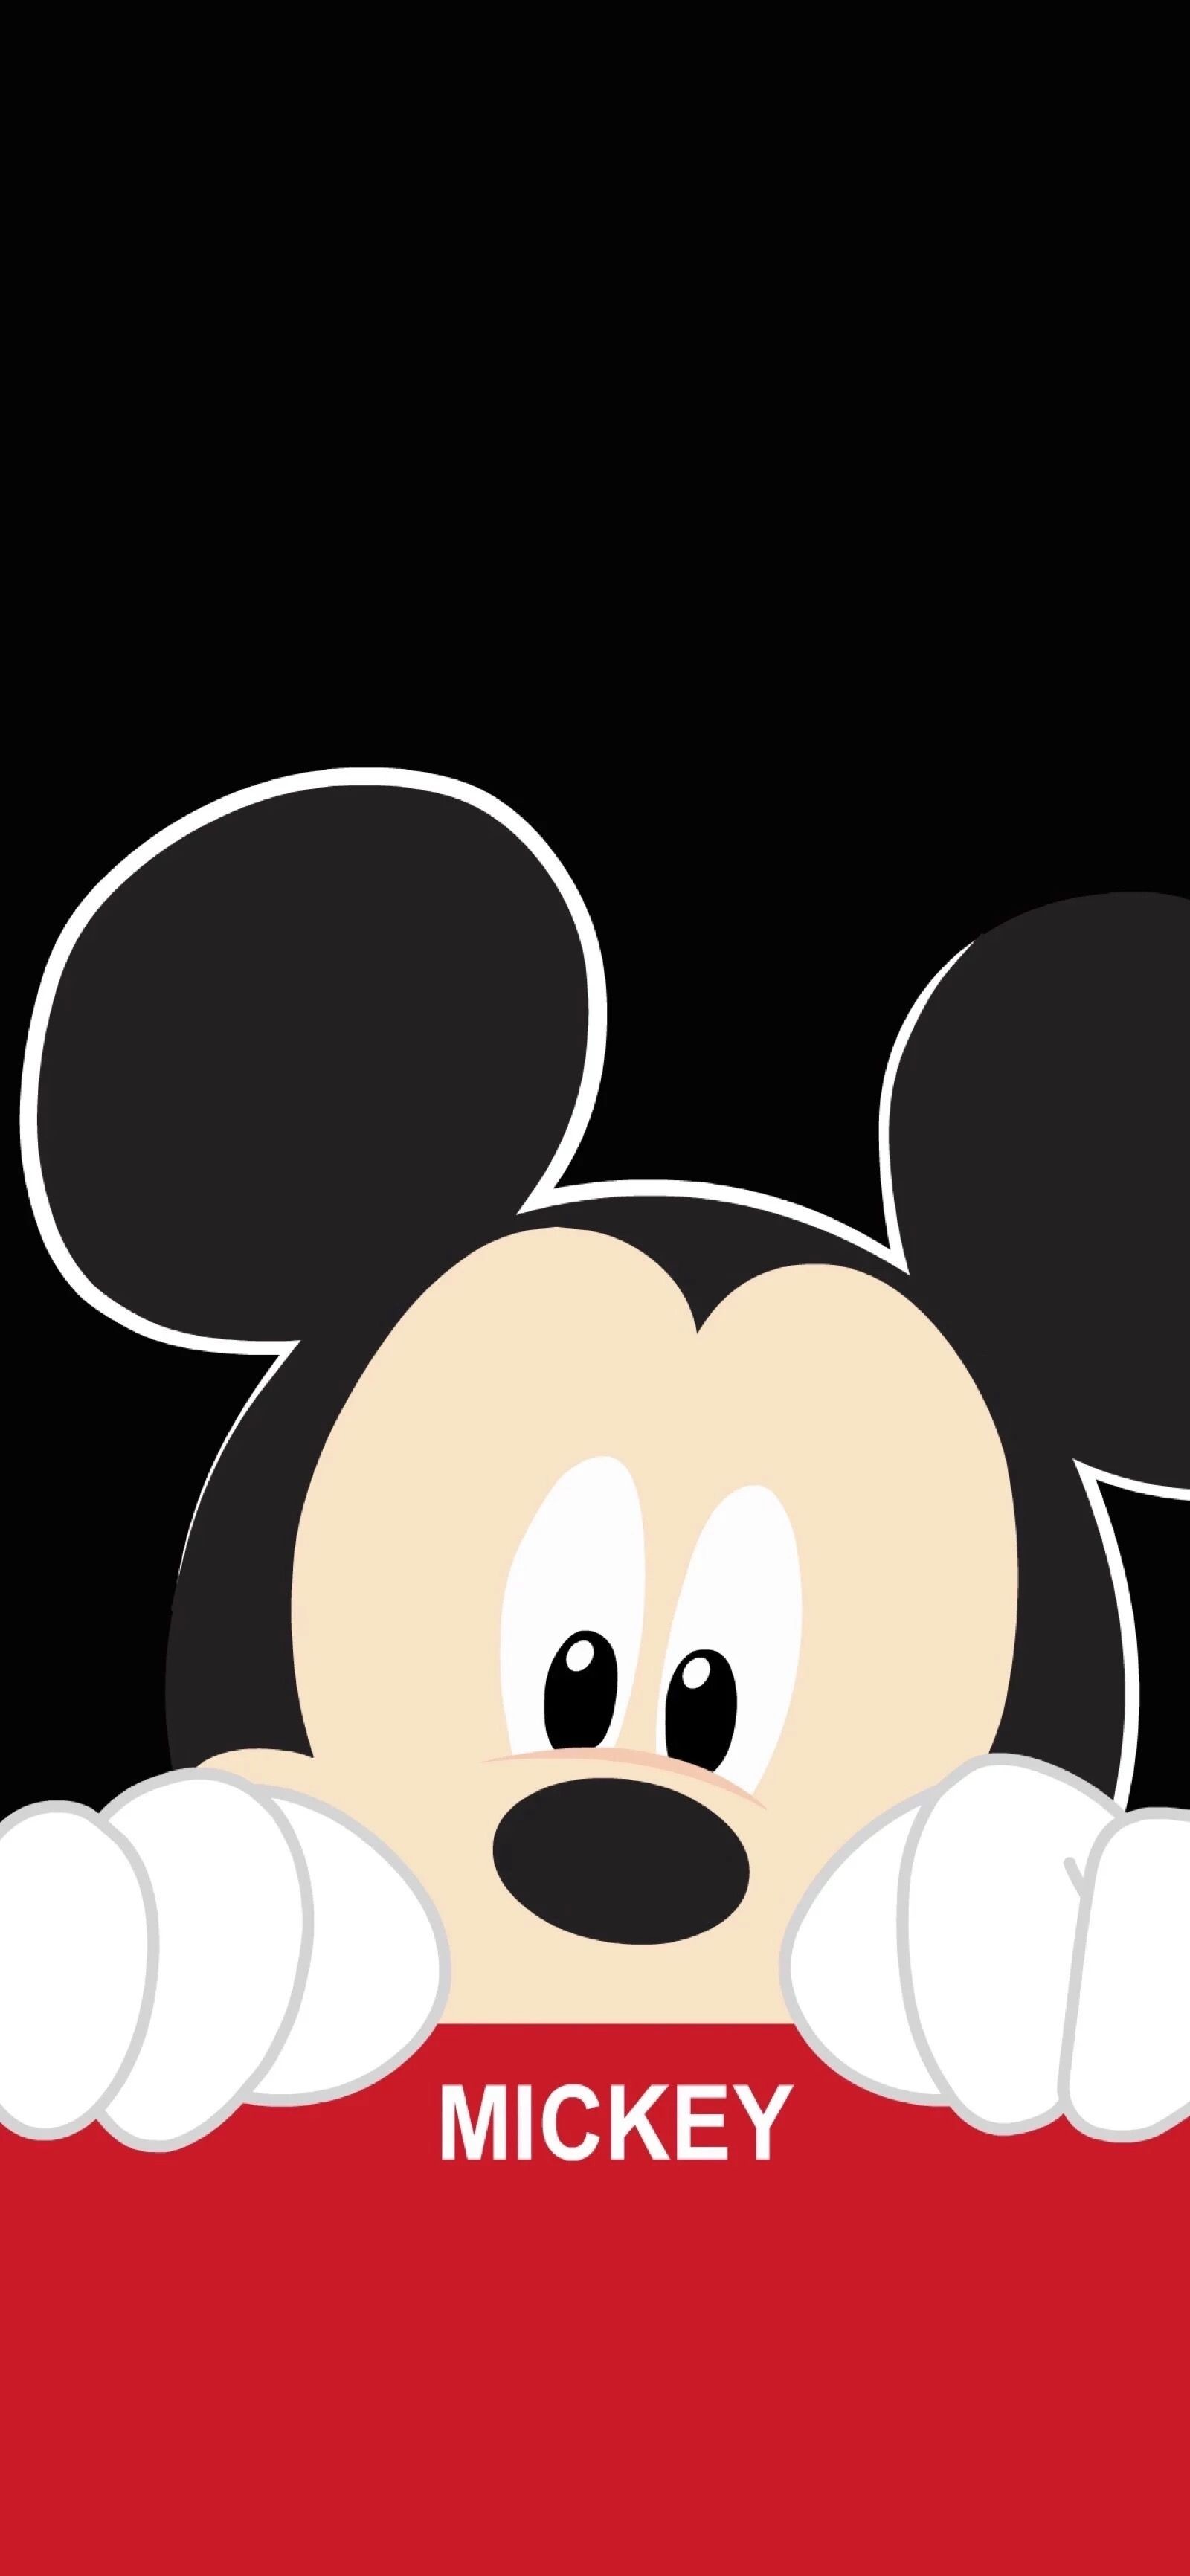 Mickey Mouse Wallpaper For Iphone 72 Images , HD Wallpaper & Backgrounds